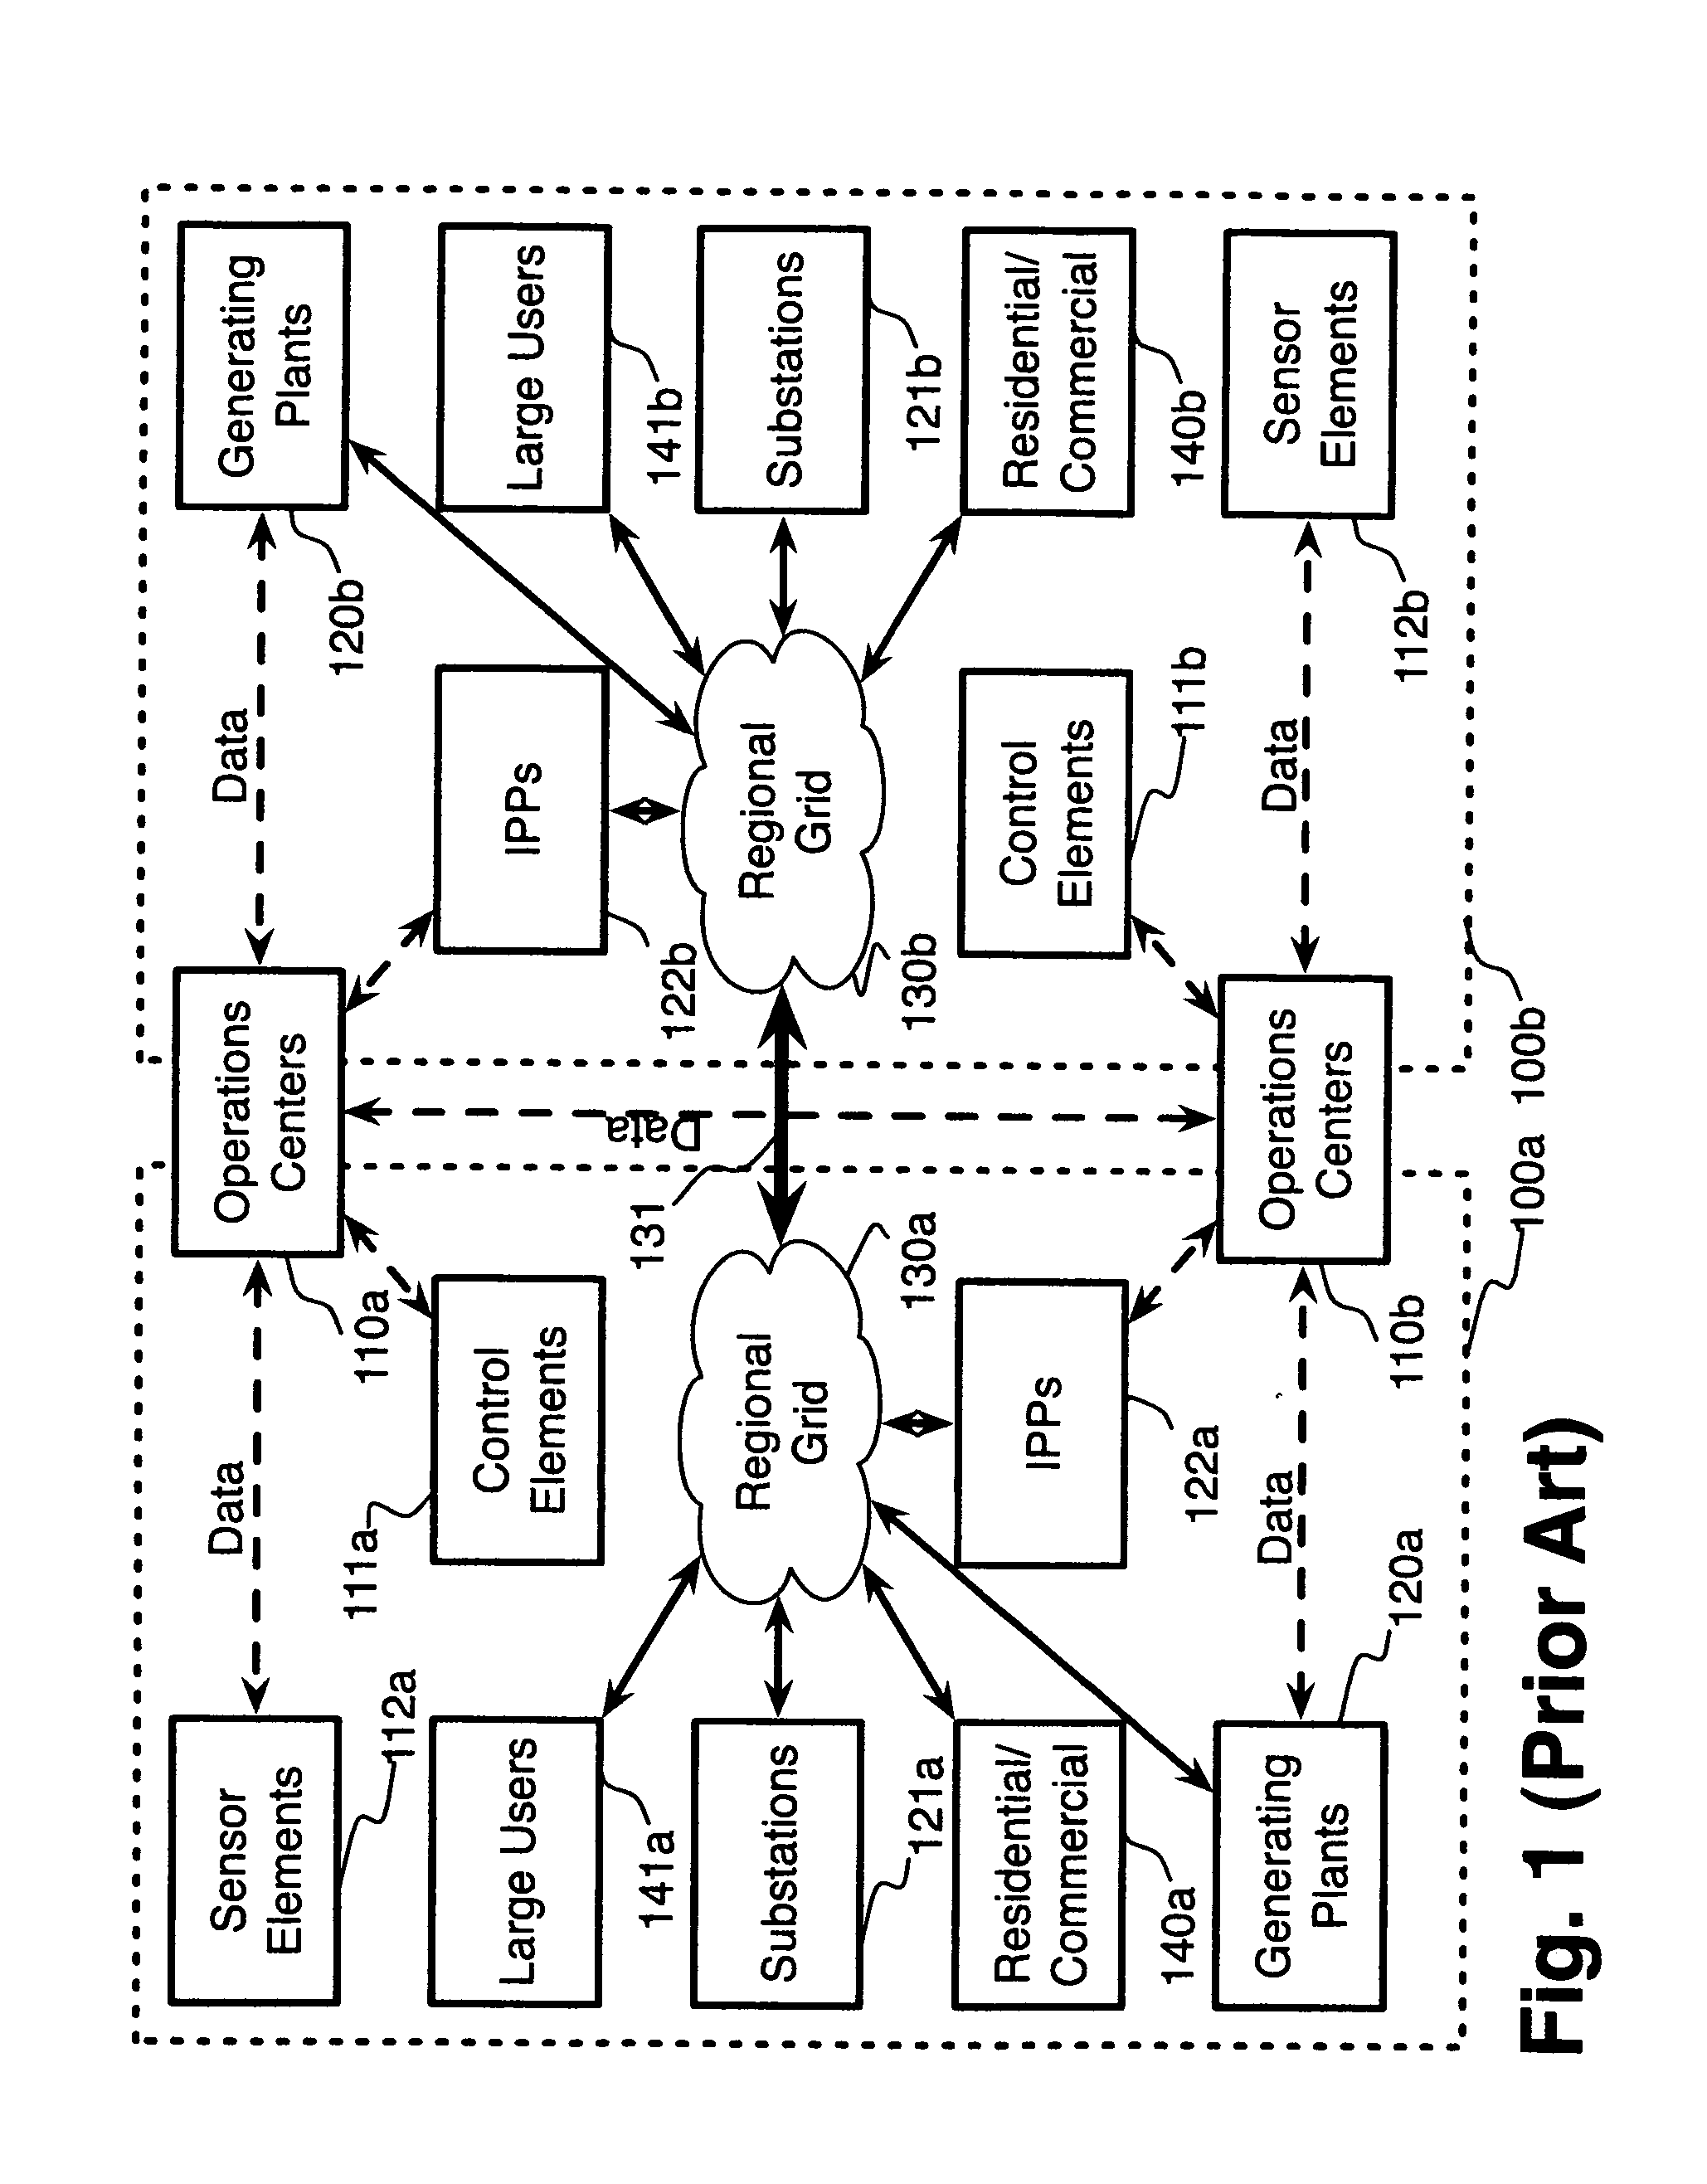 System and method for fractional smart metering